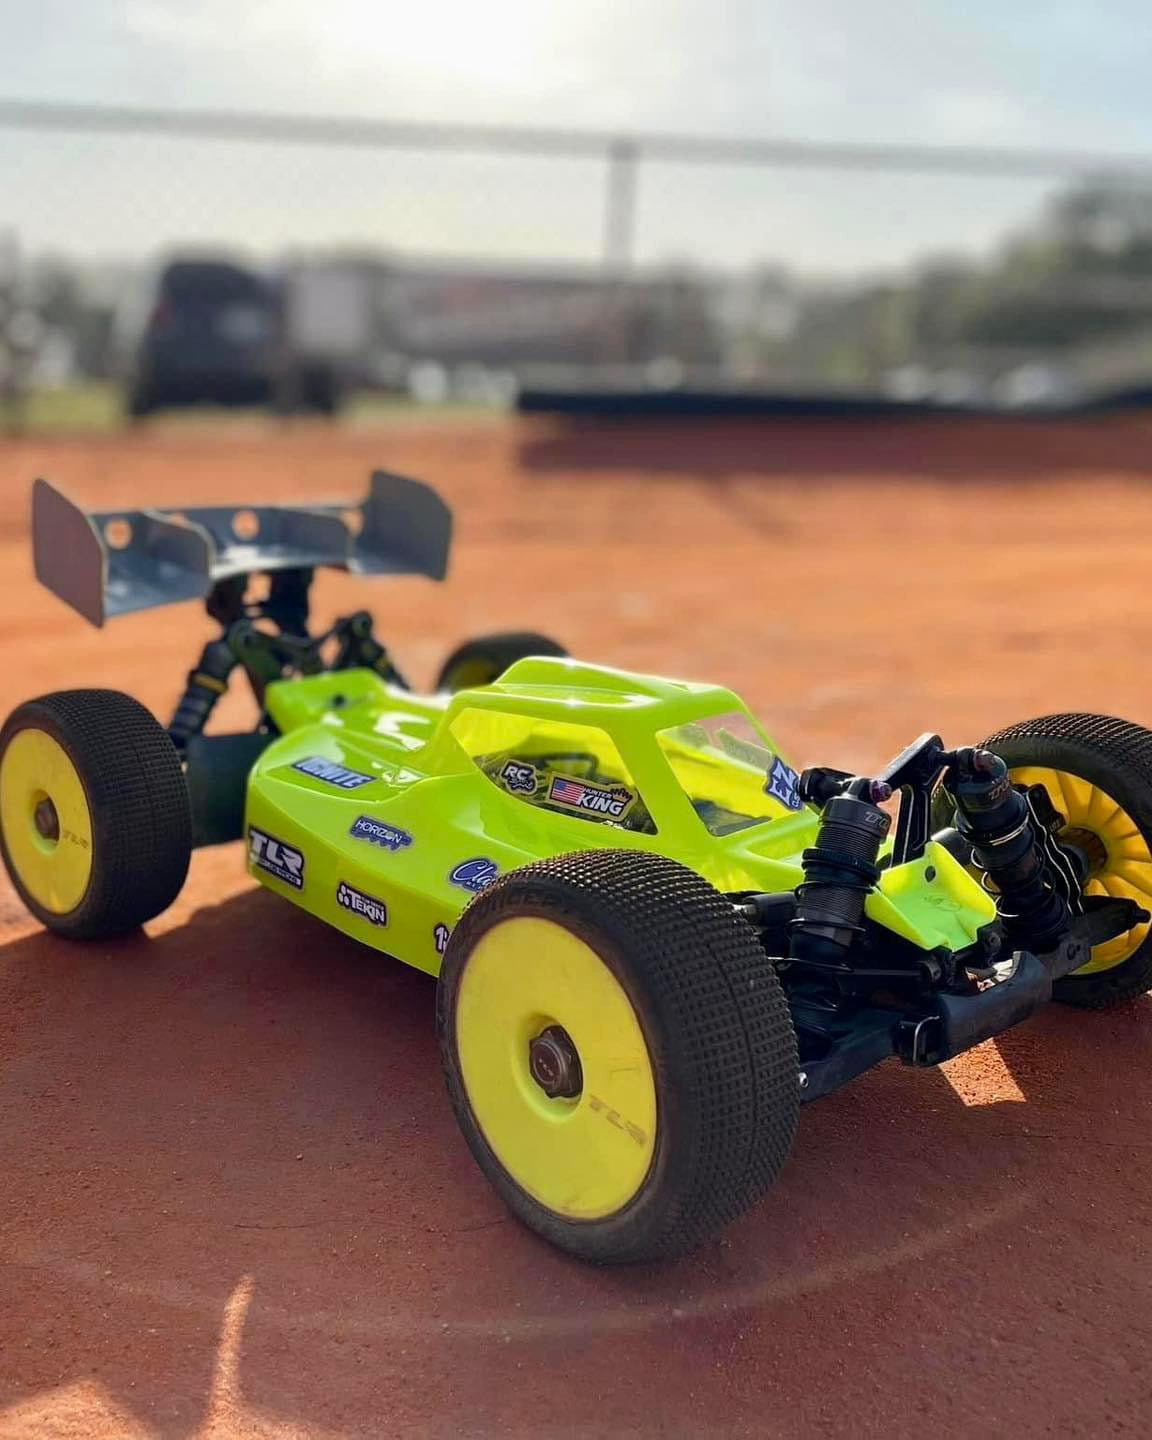 Hunter King throwing down with his 1up Equipped TLR Ride